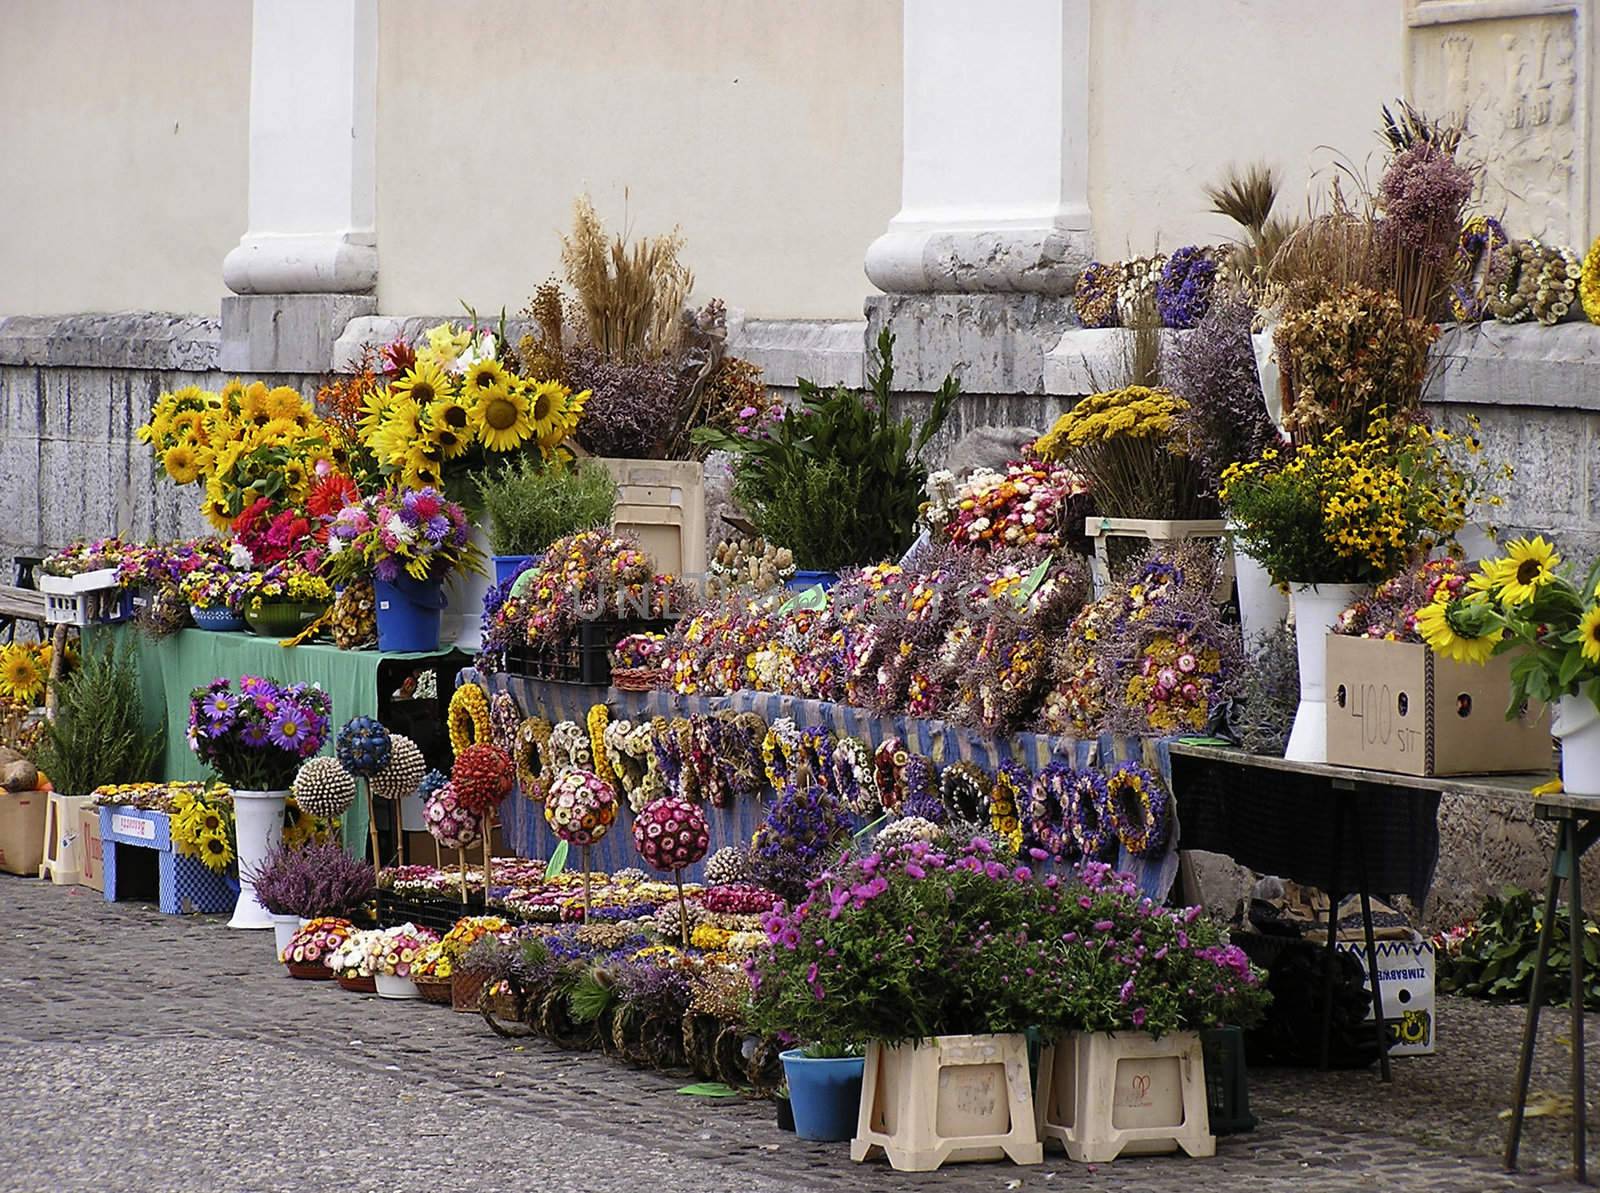 Stand with colorful flowers at lokal market.